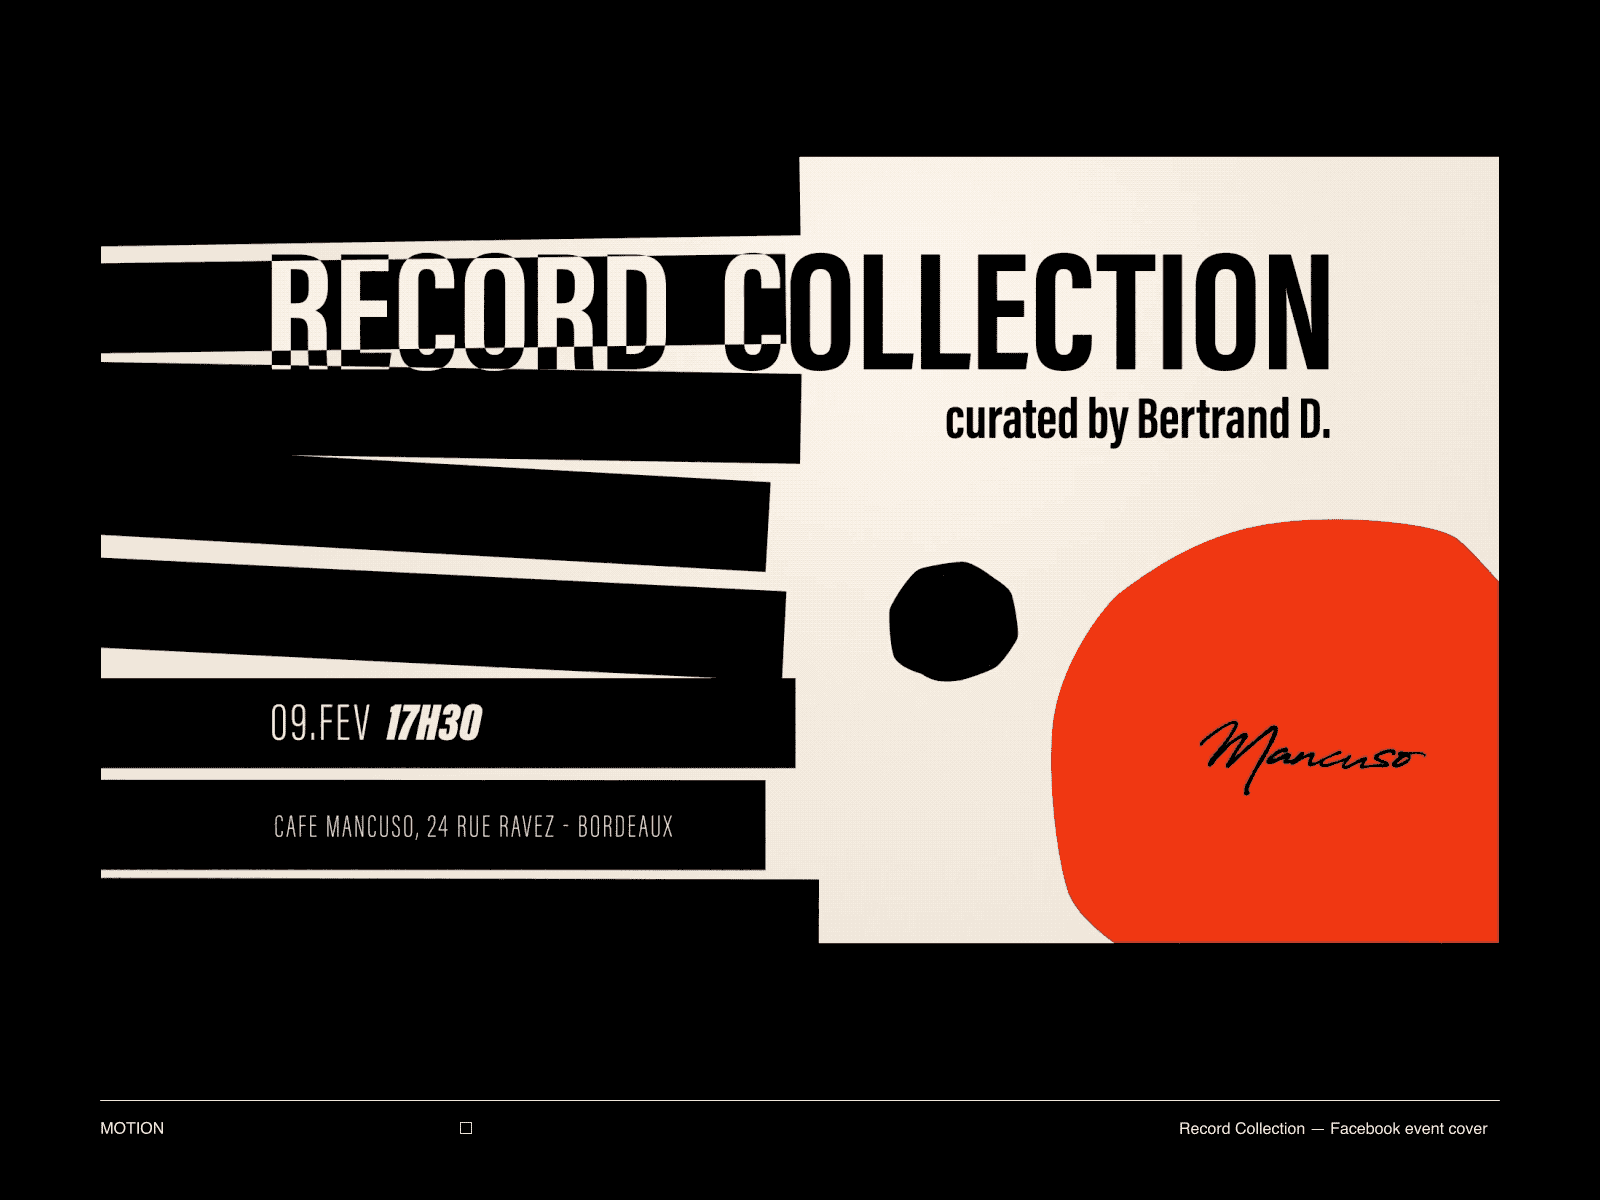 MOTION — Record Collection Facebook event cover